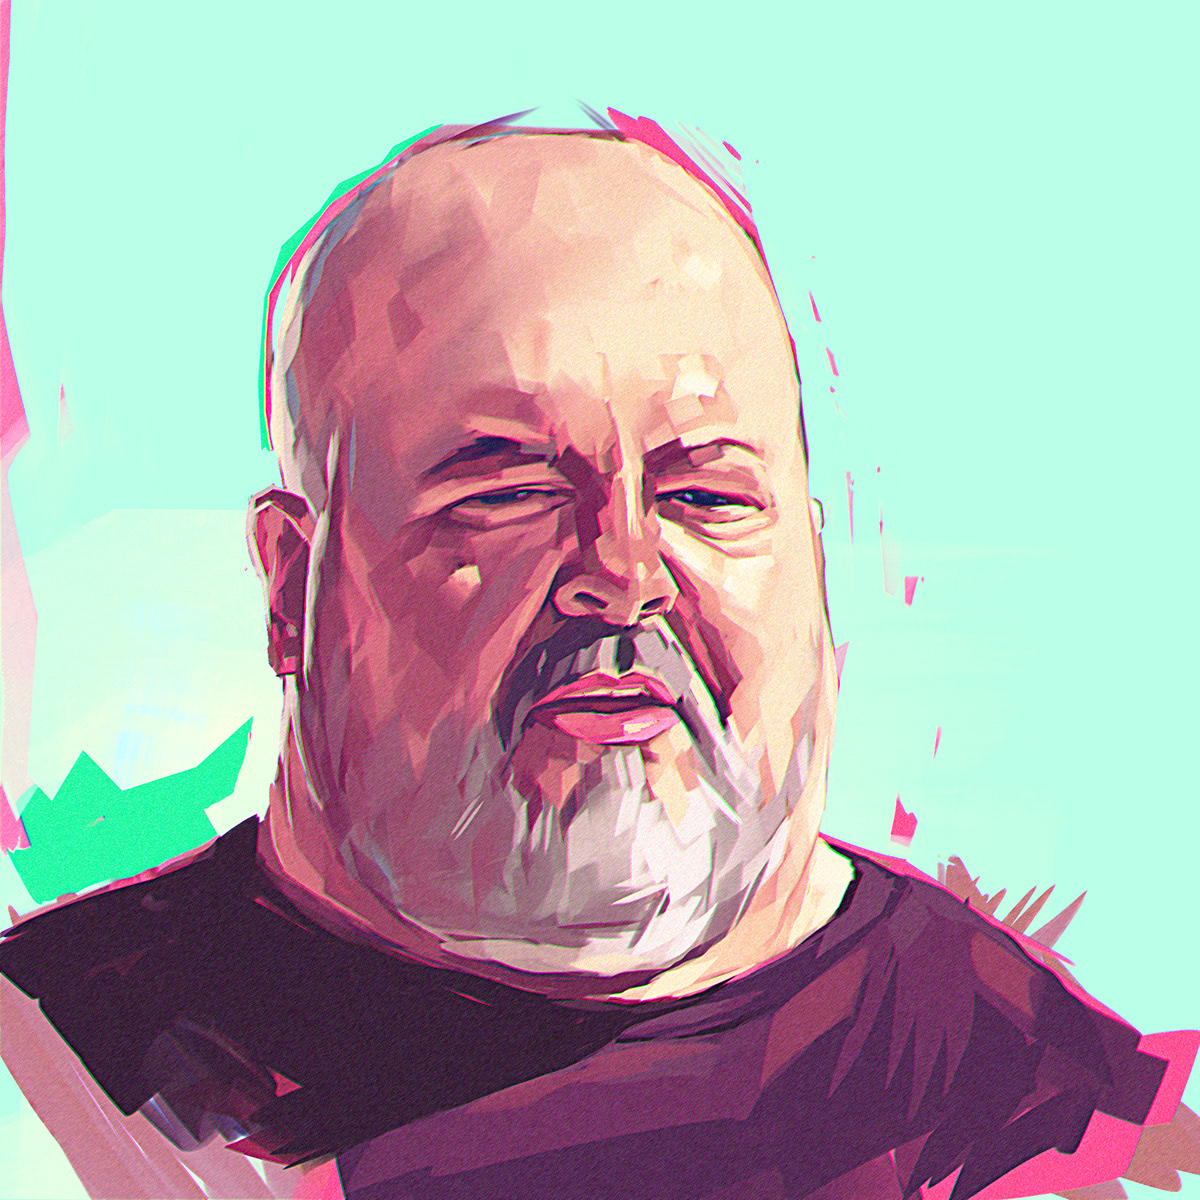 Digital painting of an overweight man